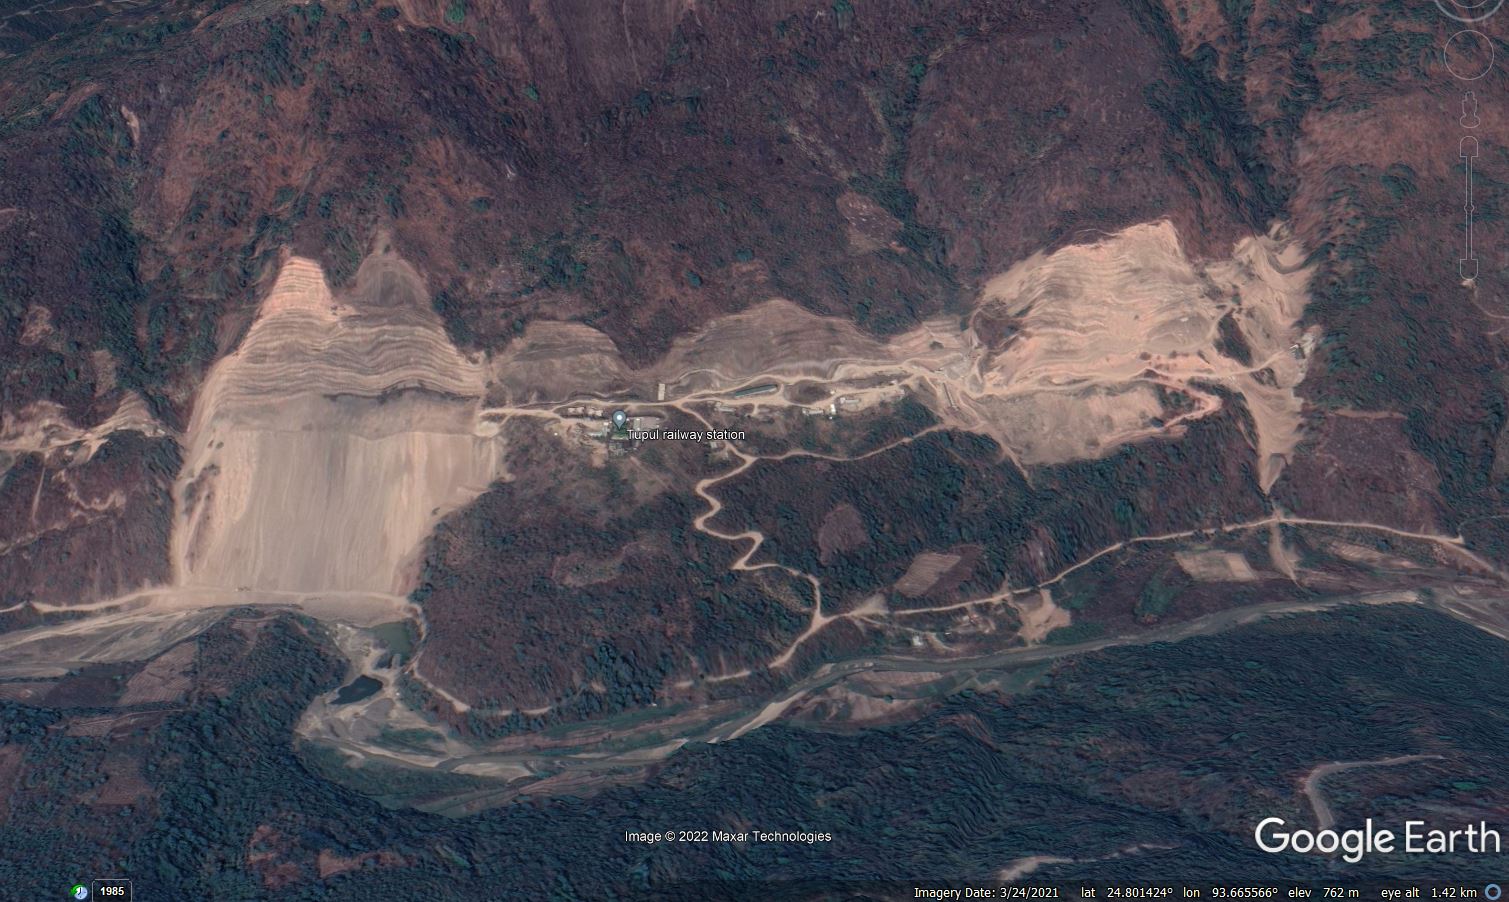 Google Earth image of the site of the 30 June 2022 Tupul landslide in India.